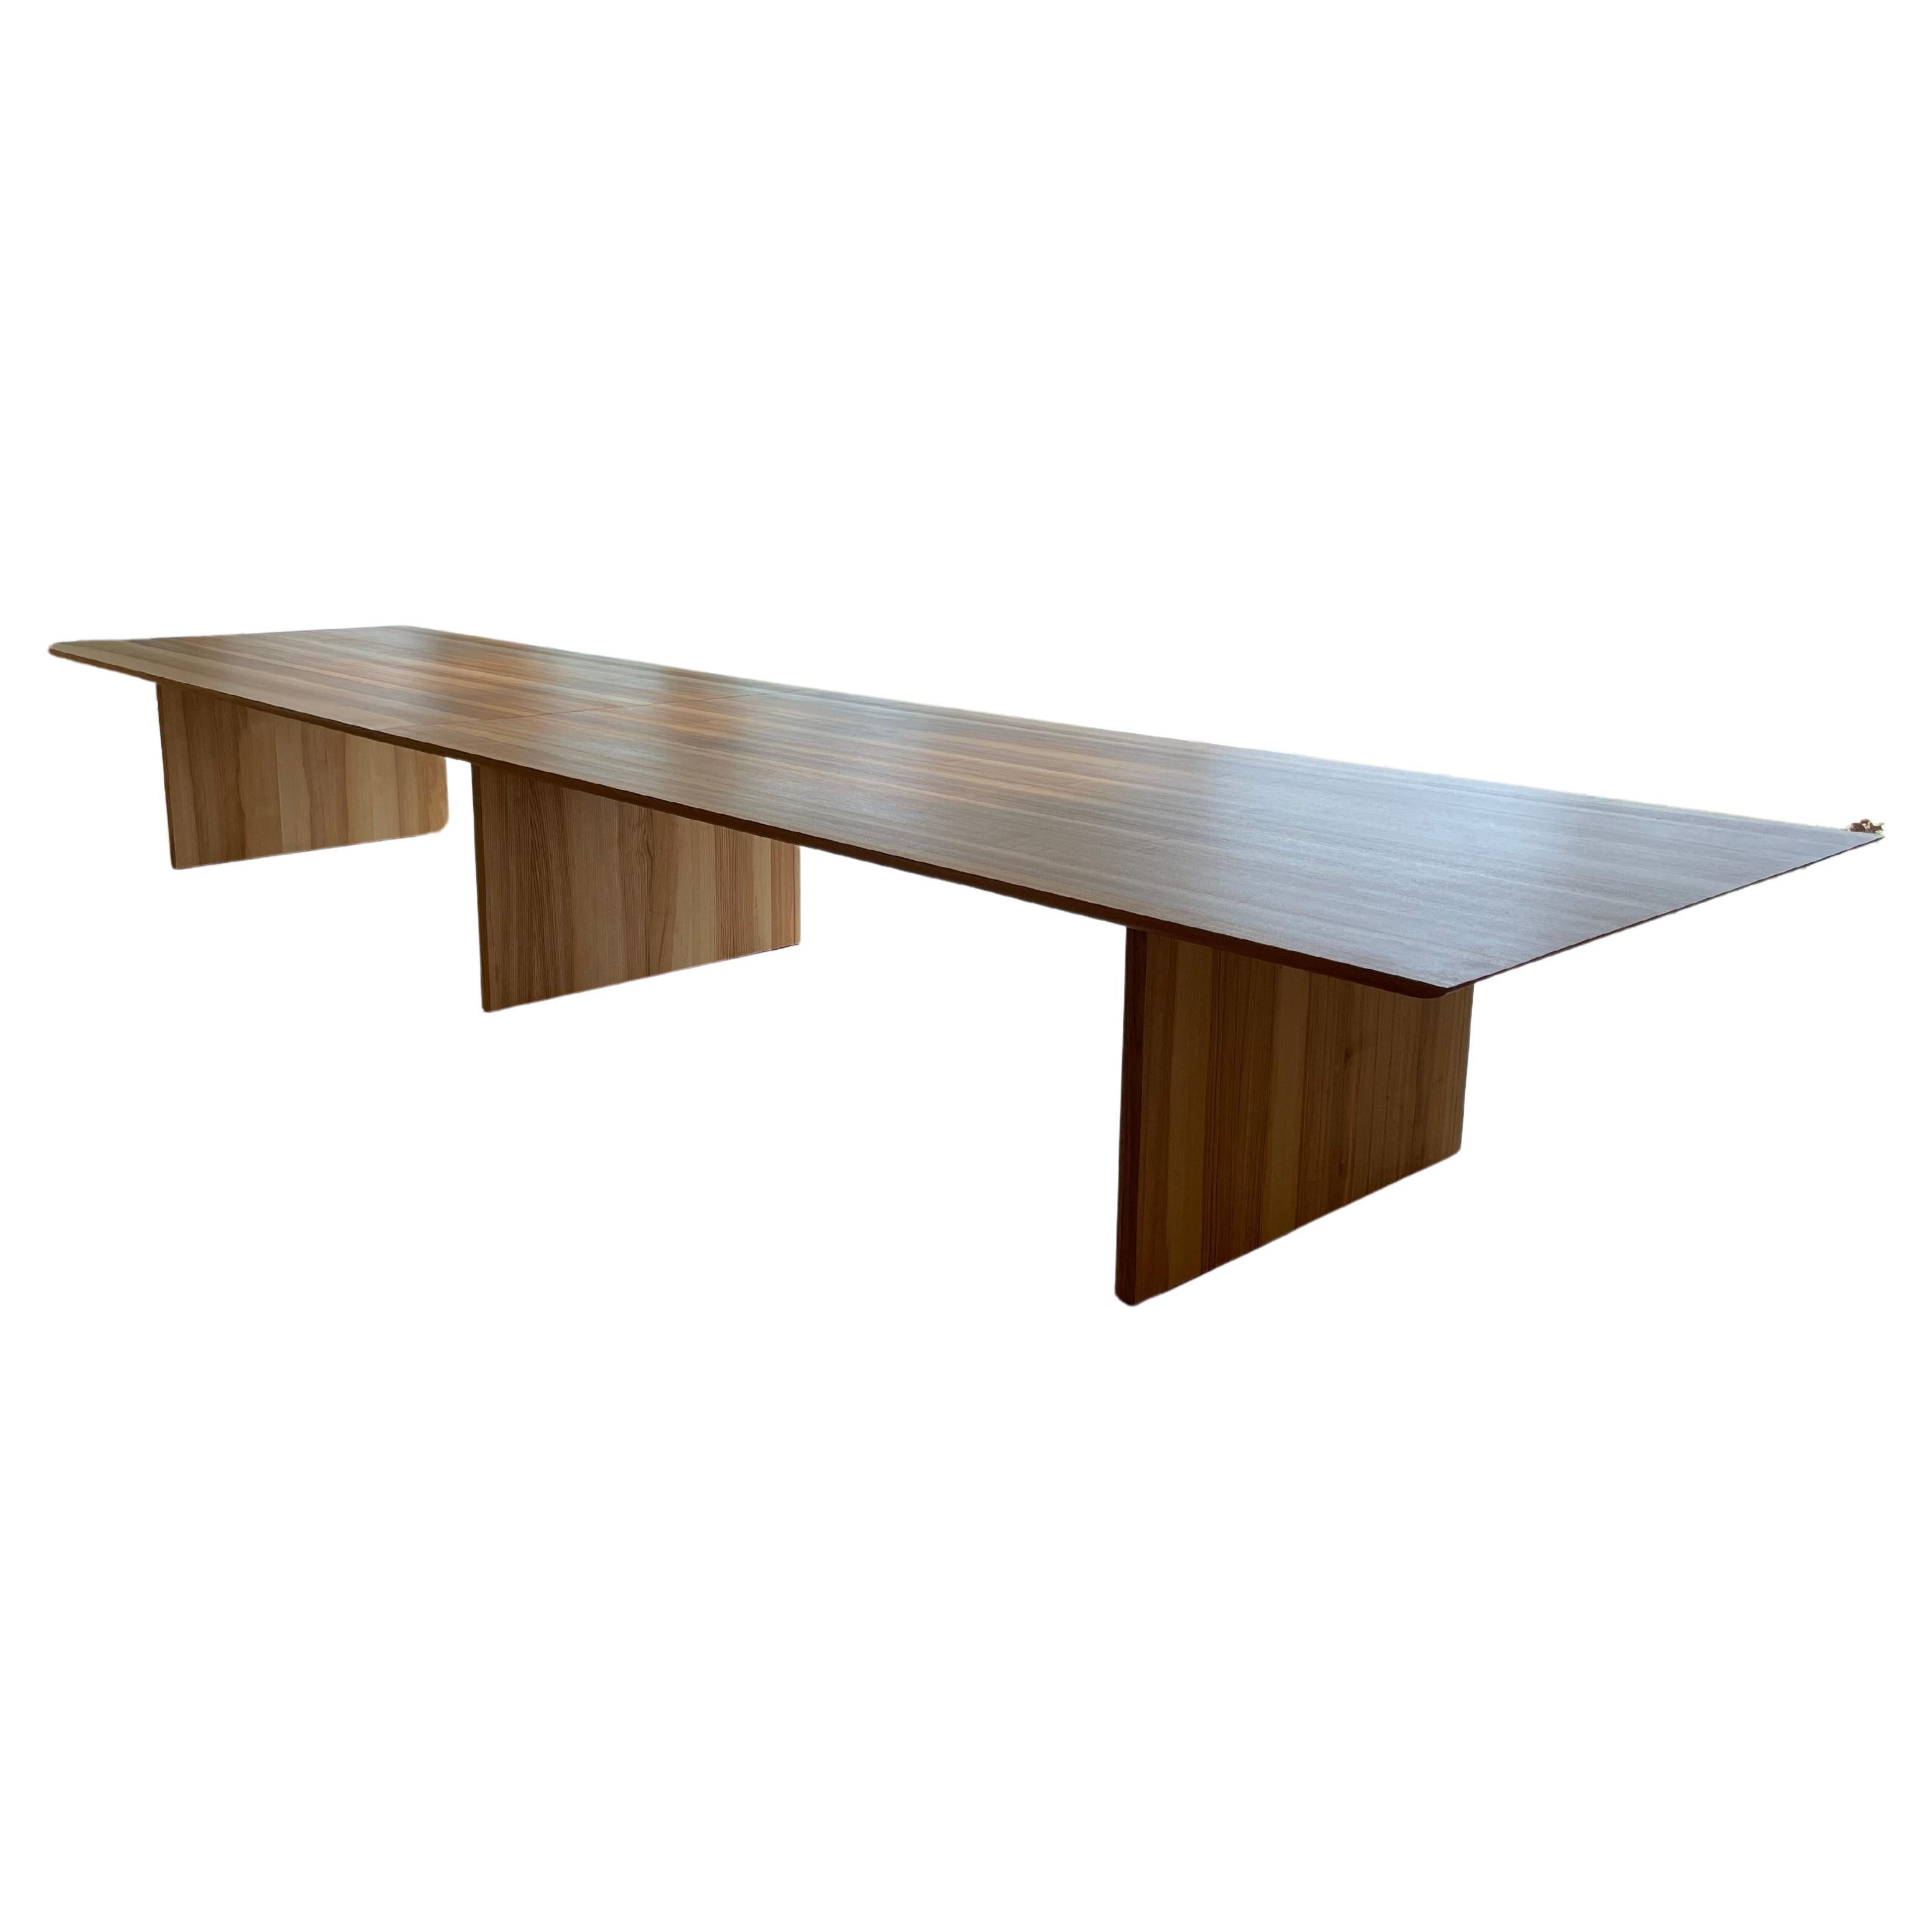 Japanese Inspired Solid Ash Wooden Dining Table Seats 20, Custom For Sale